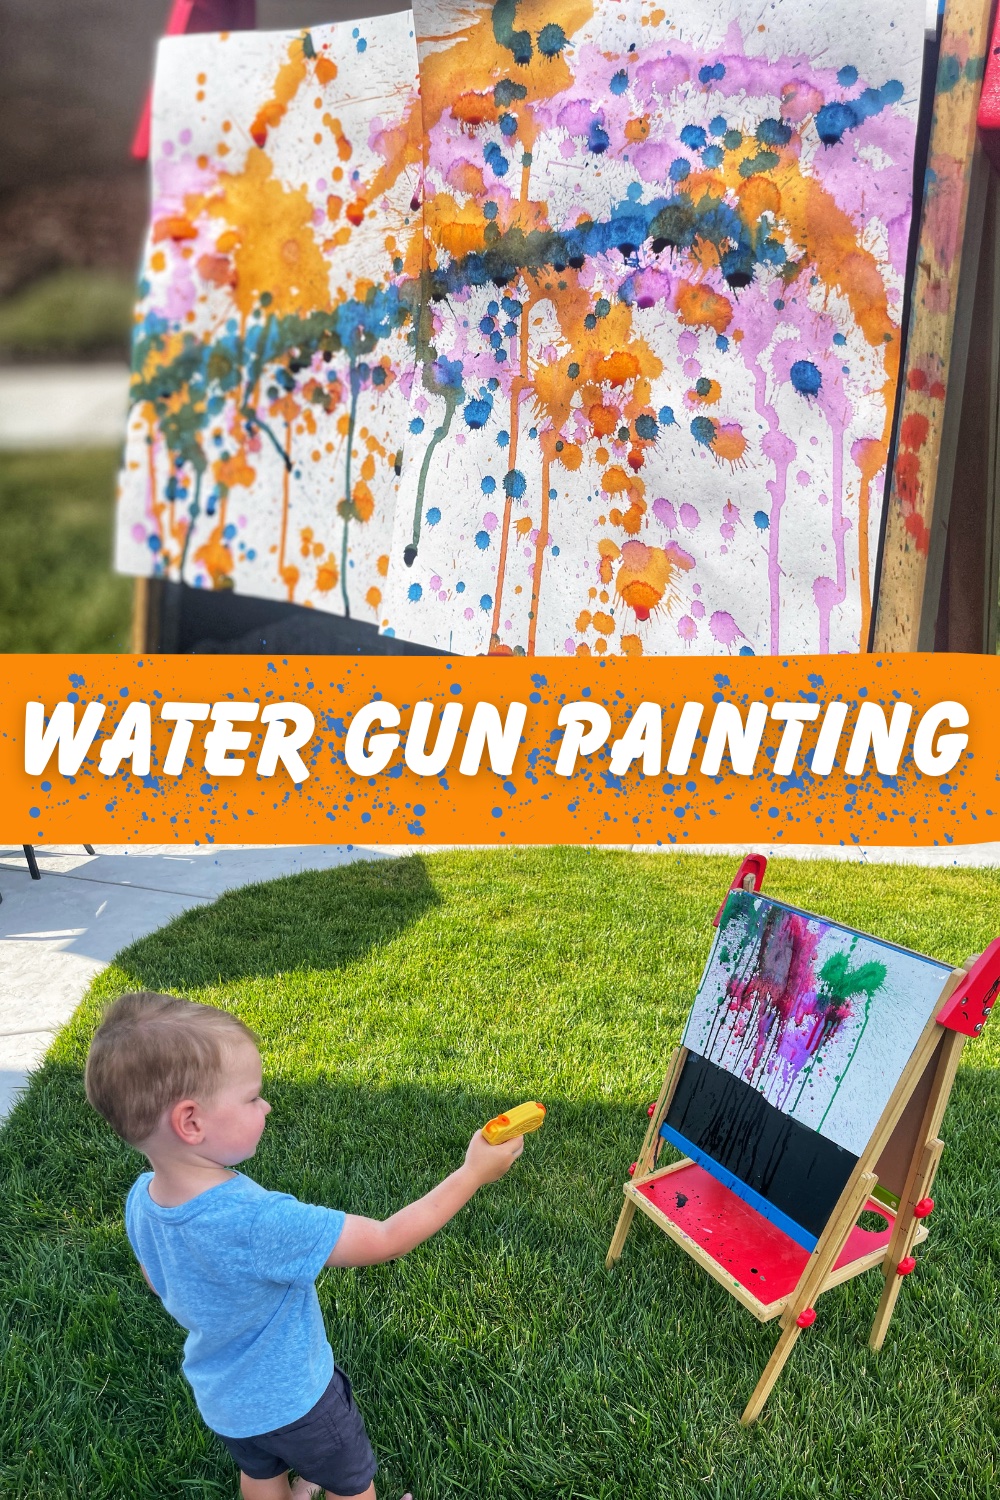 Kids will absolutely love engaging in water gun painting activity aiming their water guns, creating colorful splatters and vibrant artwork.